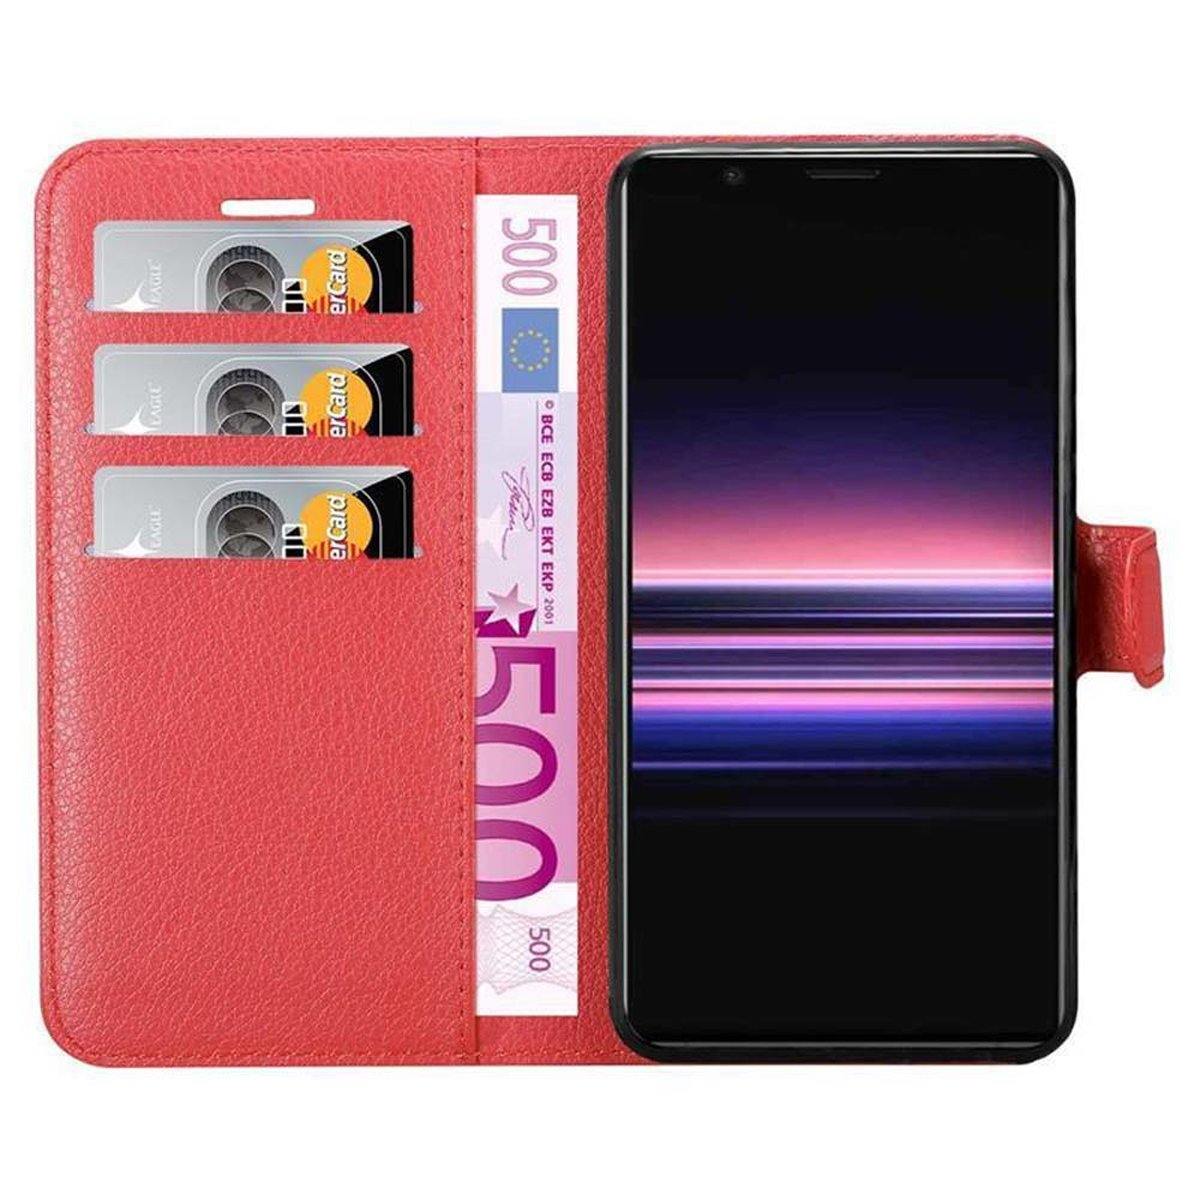 Xperia Bookcover, 5, KARMIN ROT Sony, Standfunktion, Book Hülle CADORABO